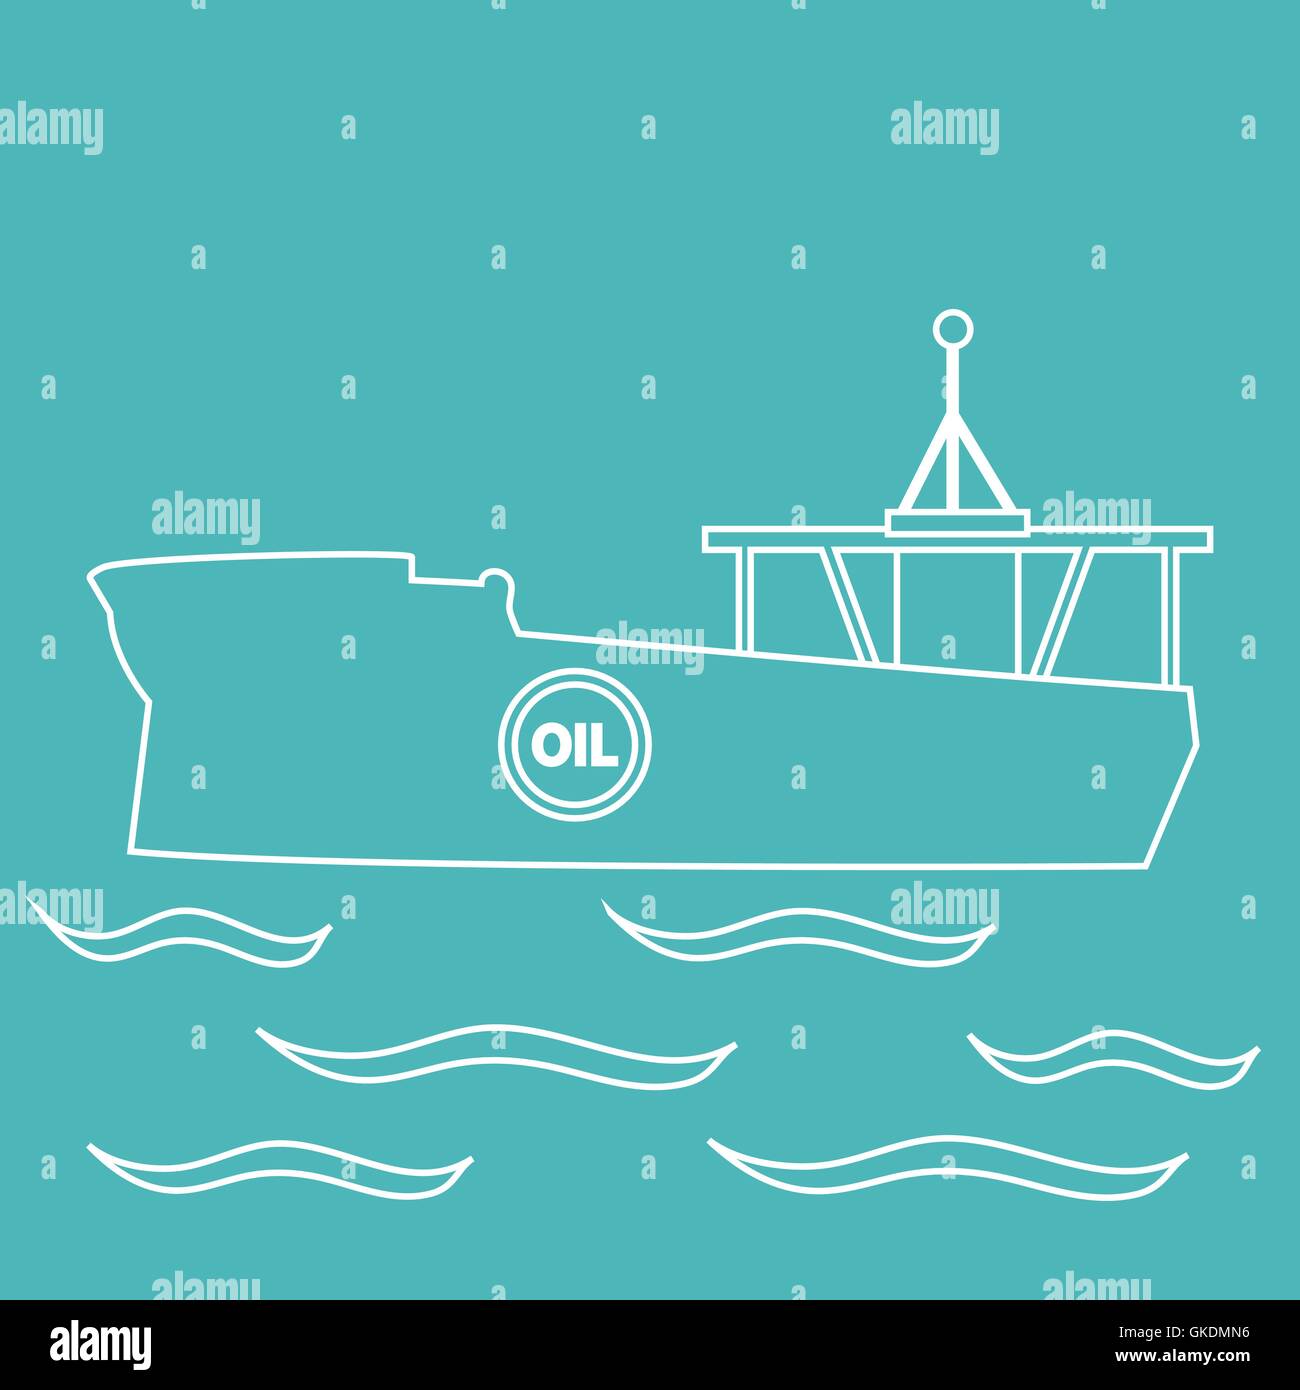 Stylized icon of the silhouette tanker of oil floating on waves on a colored background Stock Vector